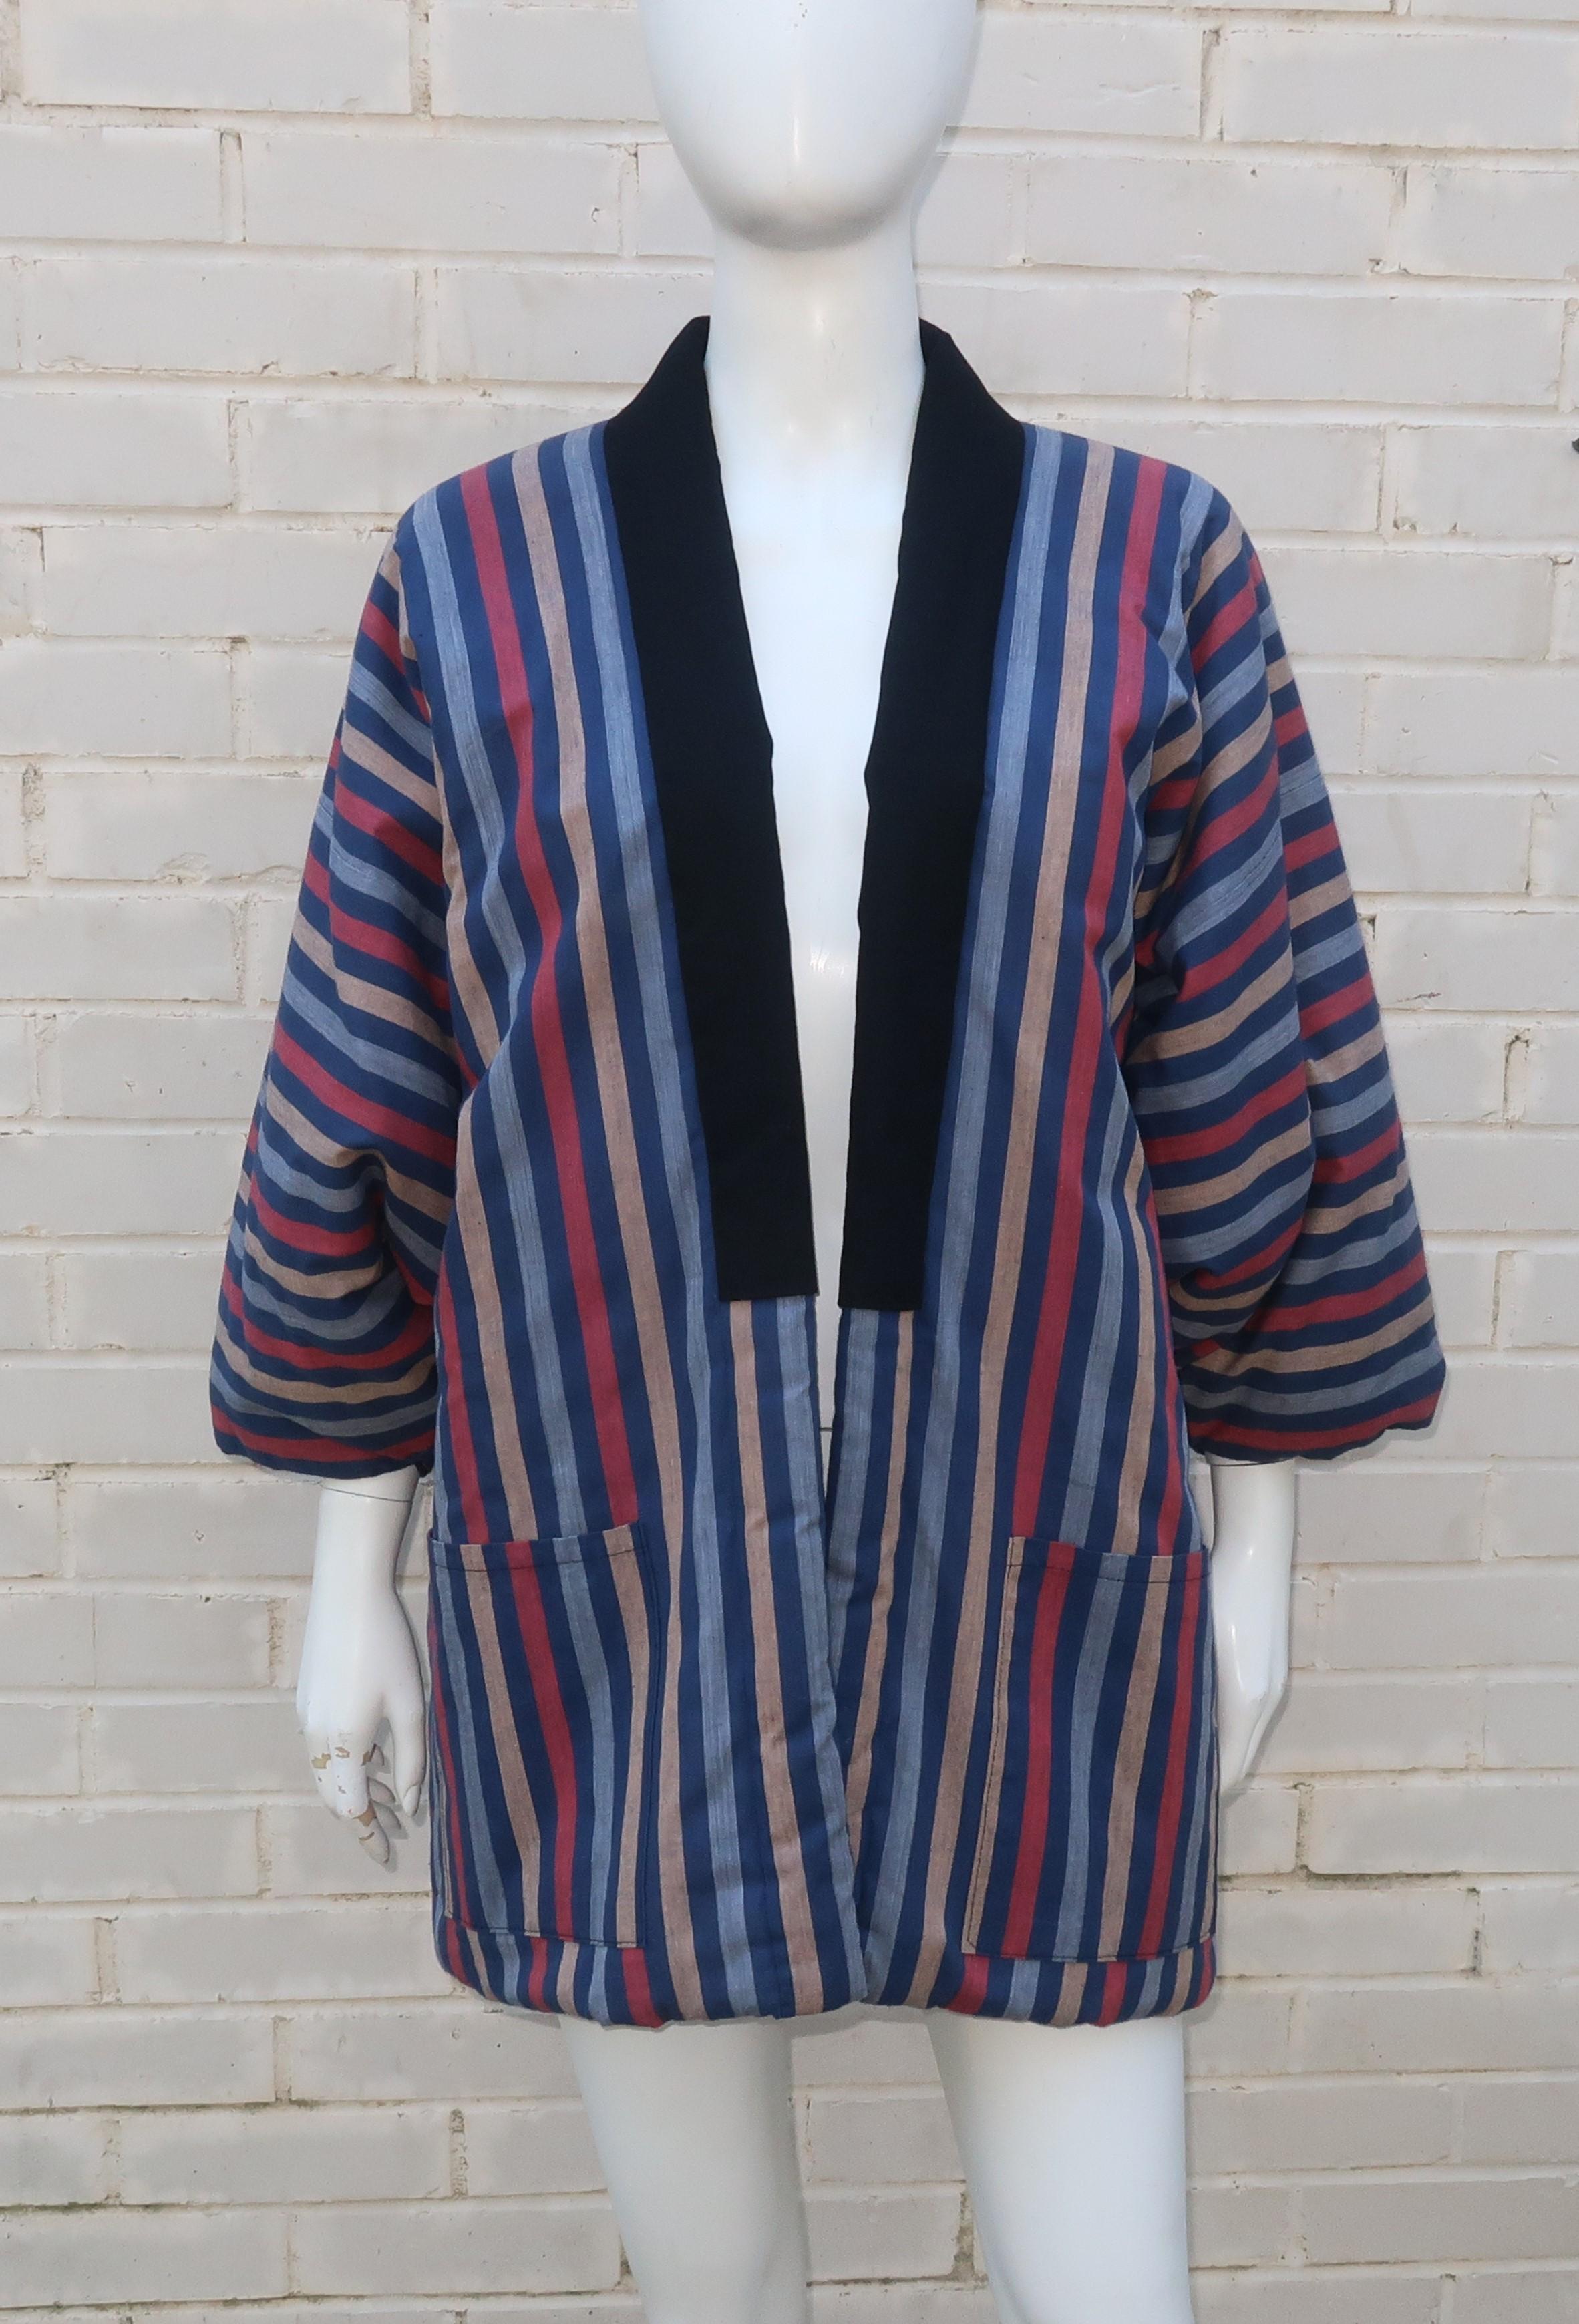 This vintage men's kimono jacket is from Matsuya, a Japanese department store which has produced kimonos since the late 1800's.  Classically cut with a black lined open front, the jacket is fabricated from a comfortable cotton striped cloth